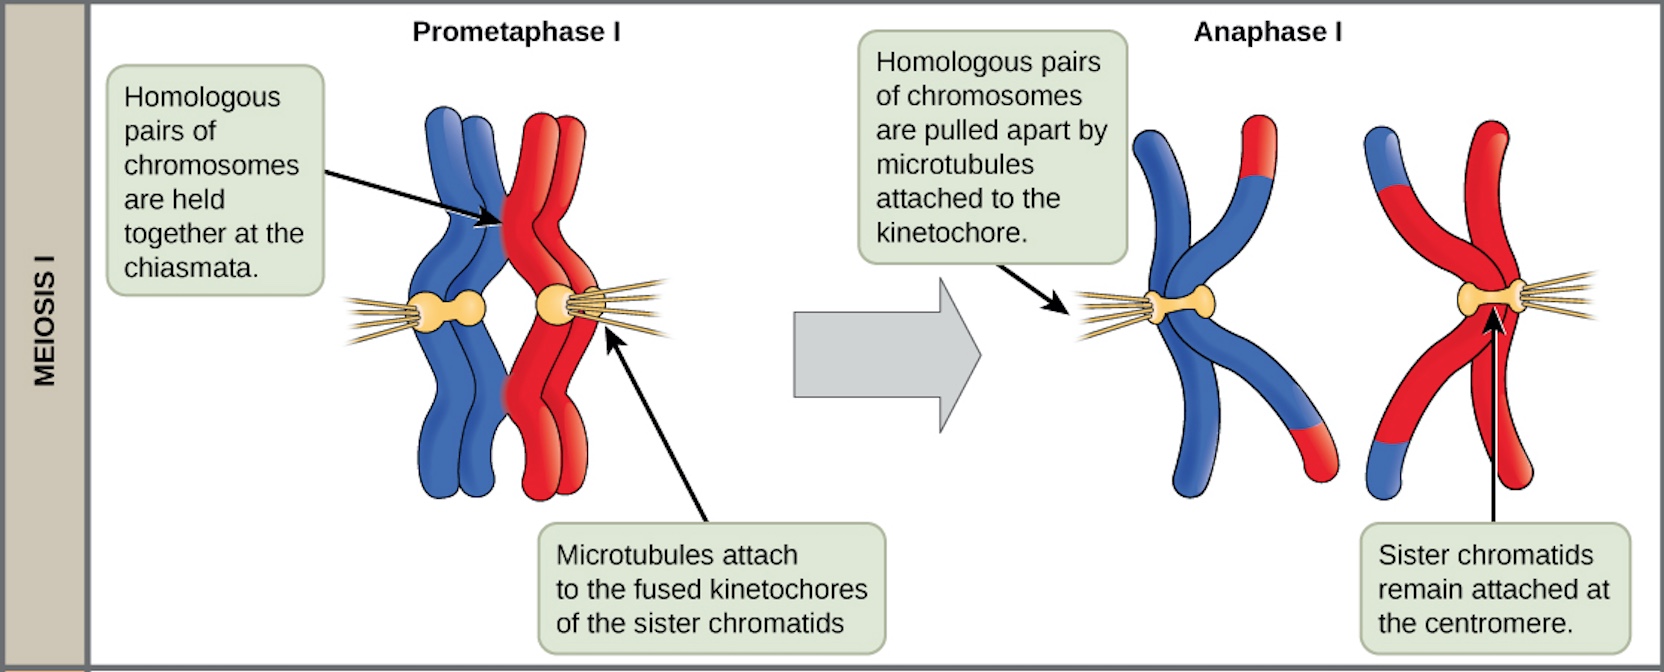 In prometaphase I, homologous pairs of chromosomes are held together by chiasmata. In anaphase I, the homologous pair separates and the connections at the chiasmata are broken, but the sister chromatids remain attached at the centromere.